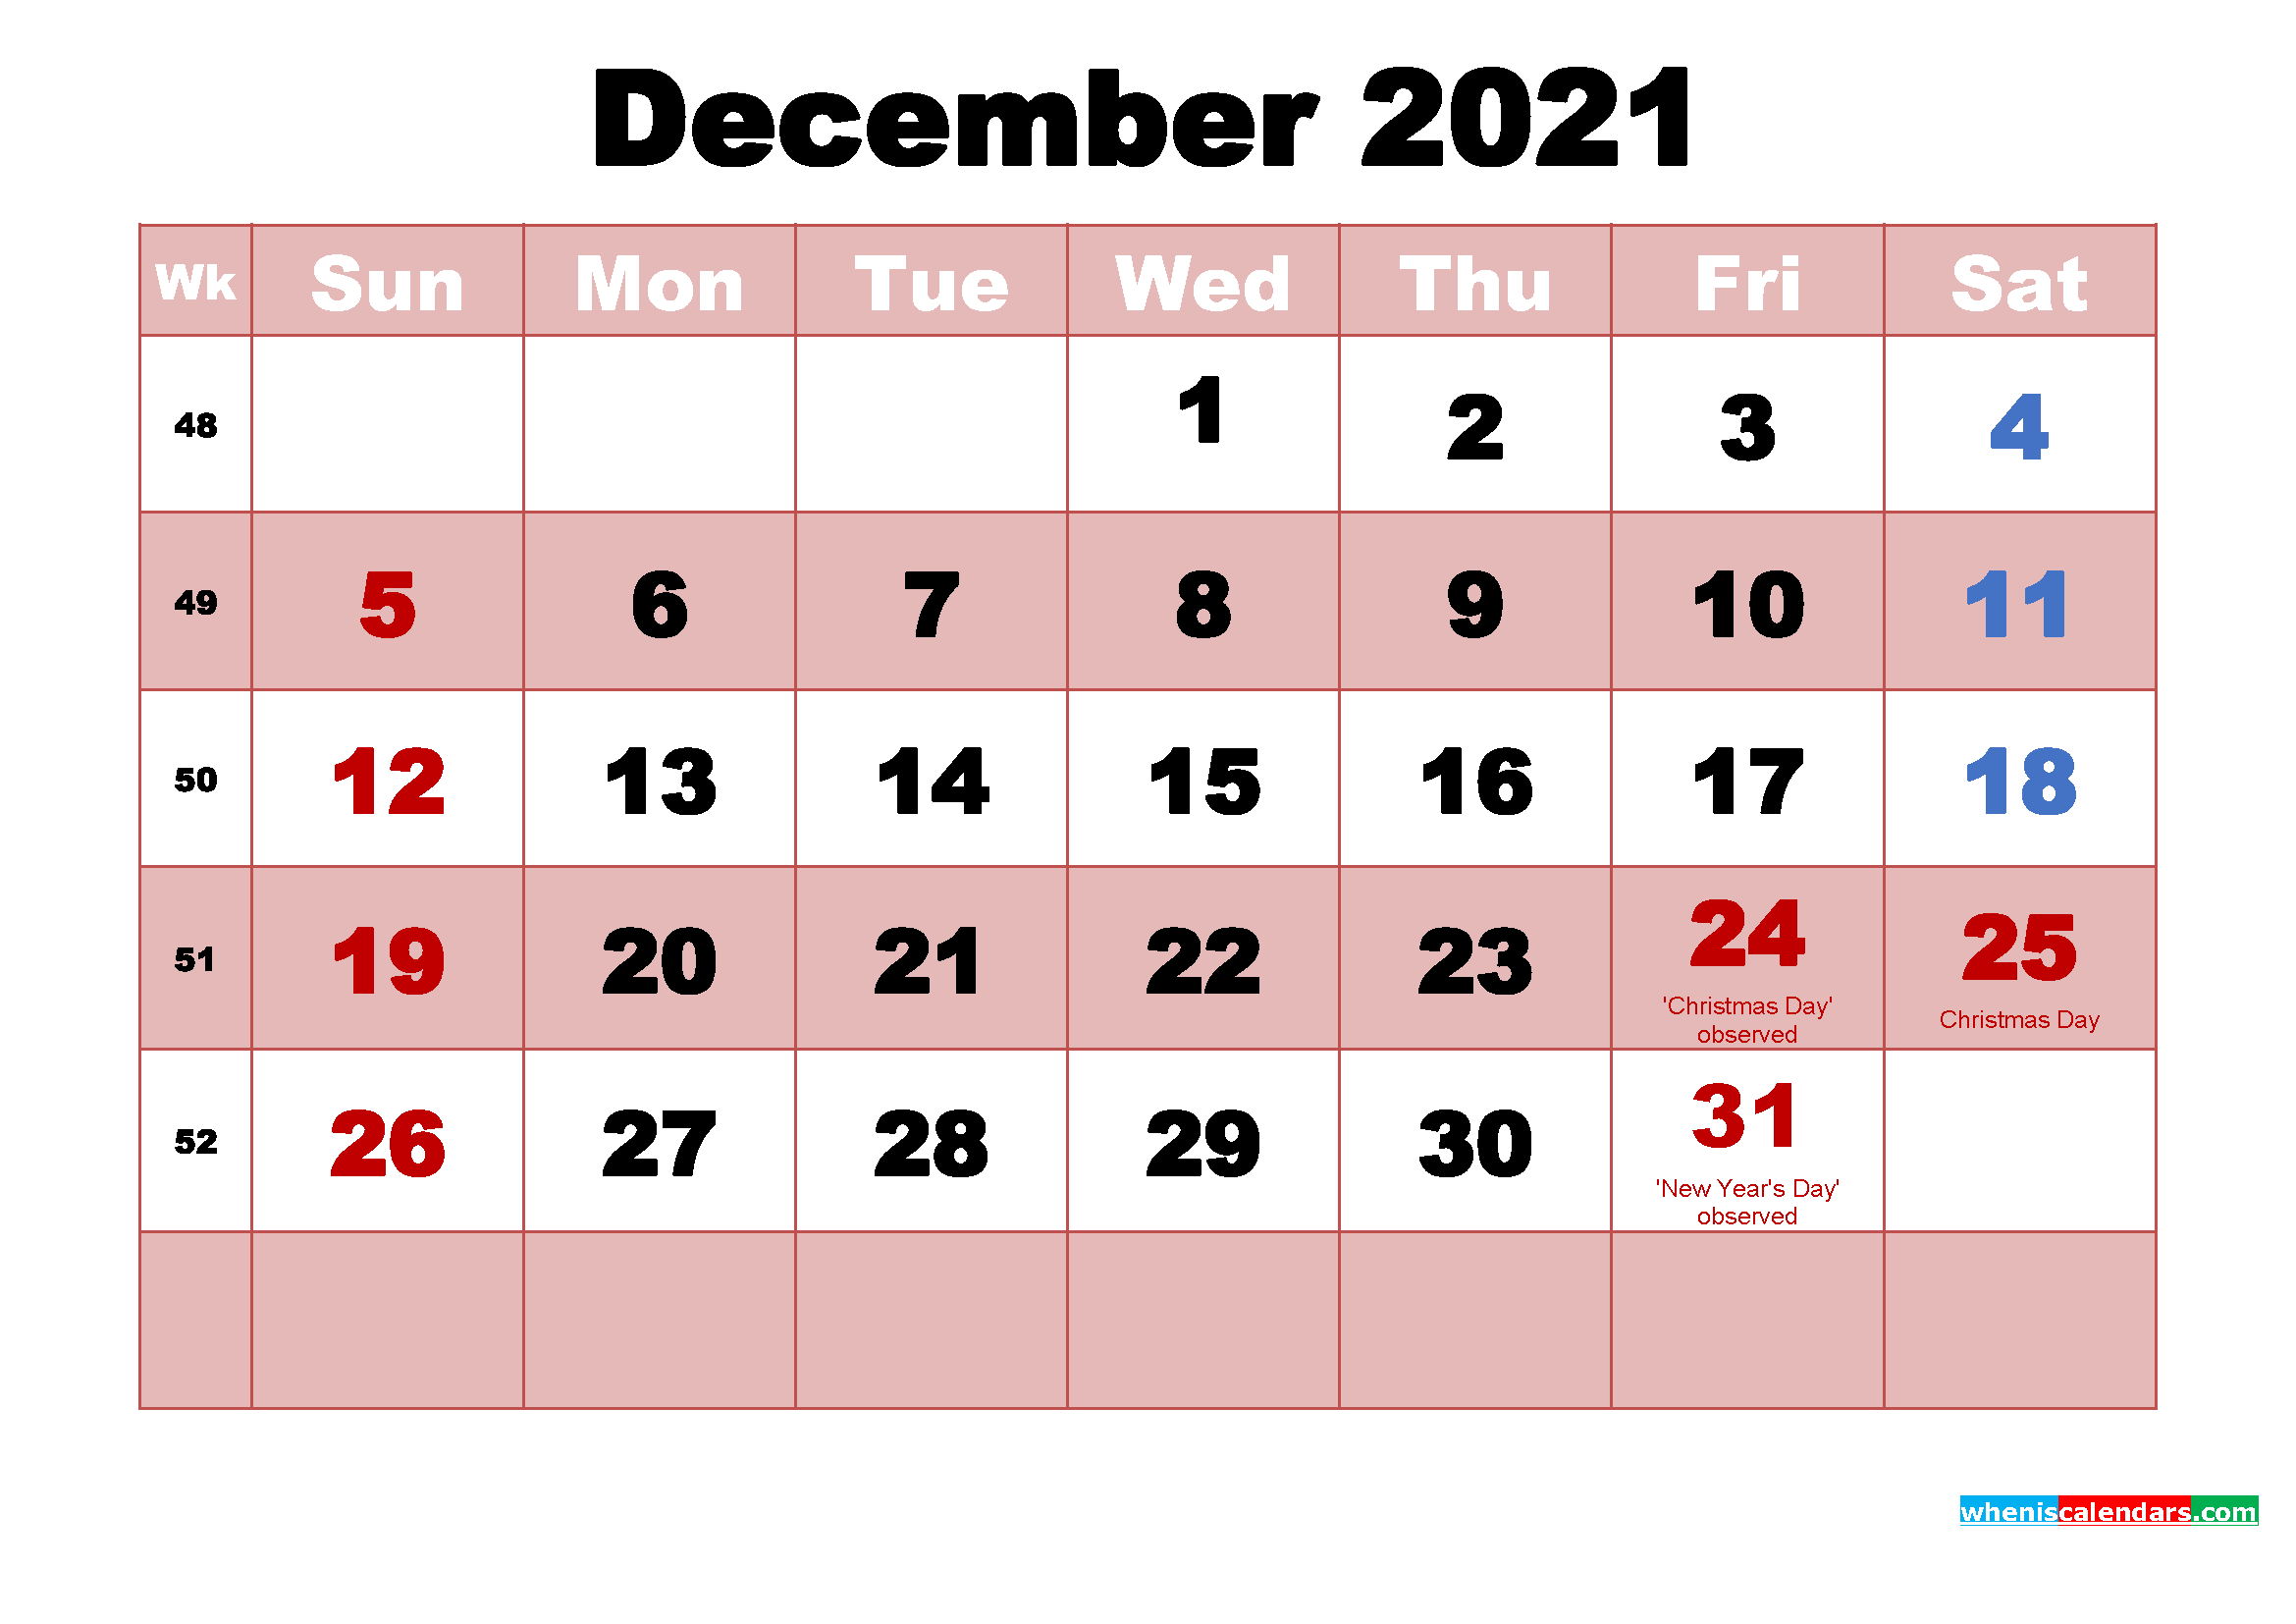 December 2021 Printable Monthly Calendar with Holidays